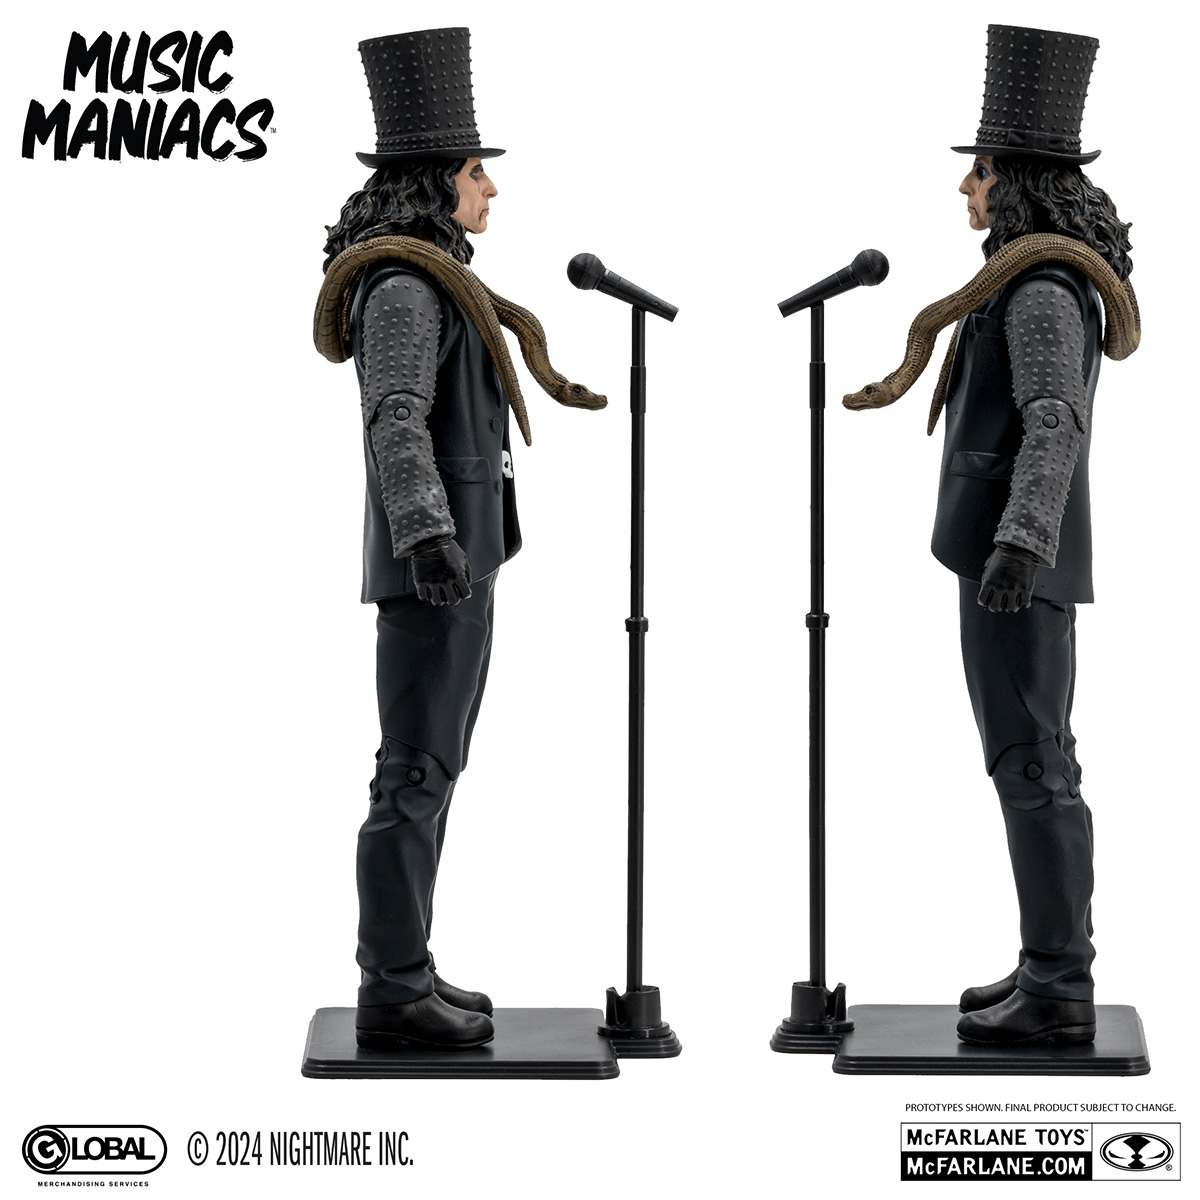 Alice Cooper Music Maniacs Metal Wave 1 6-Inch Scale Action Figure